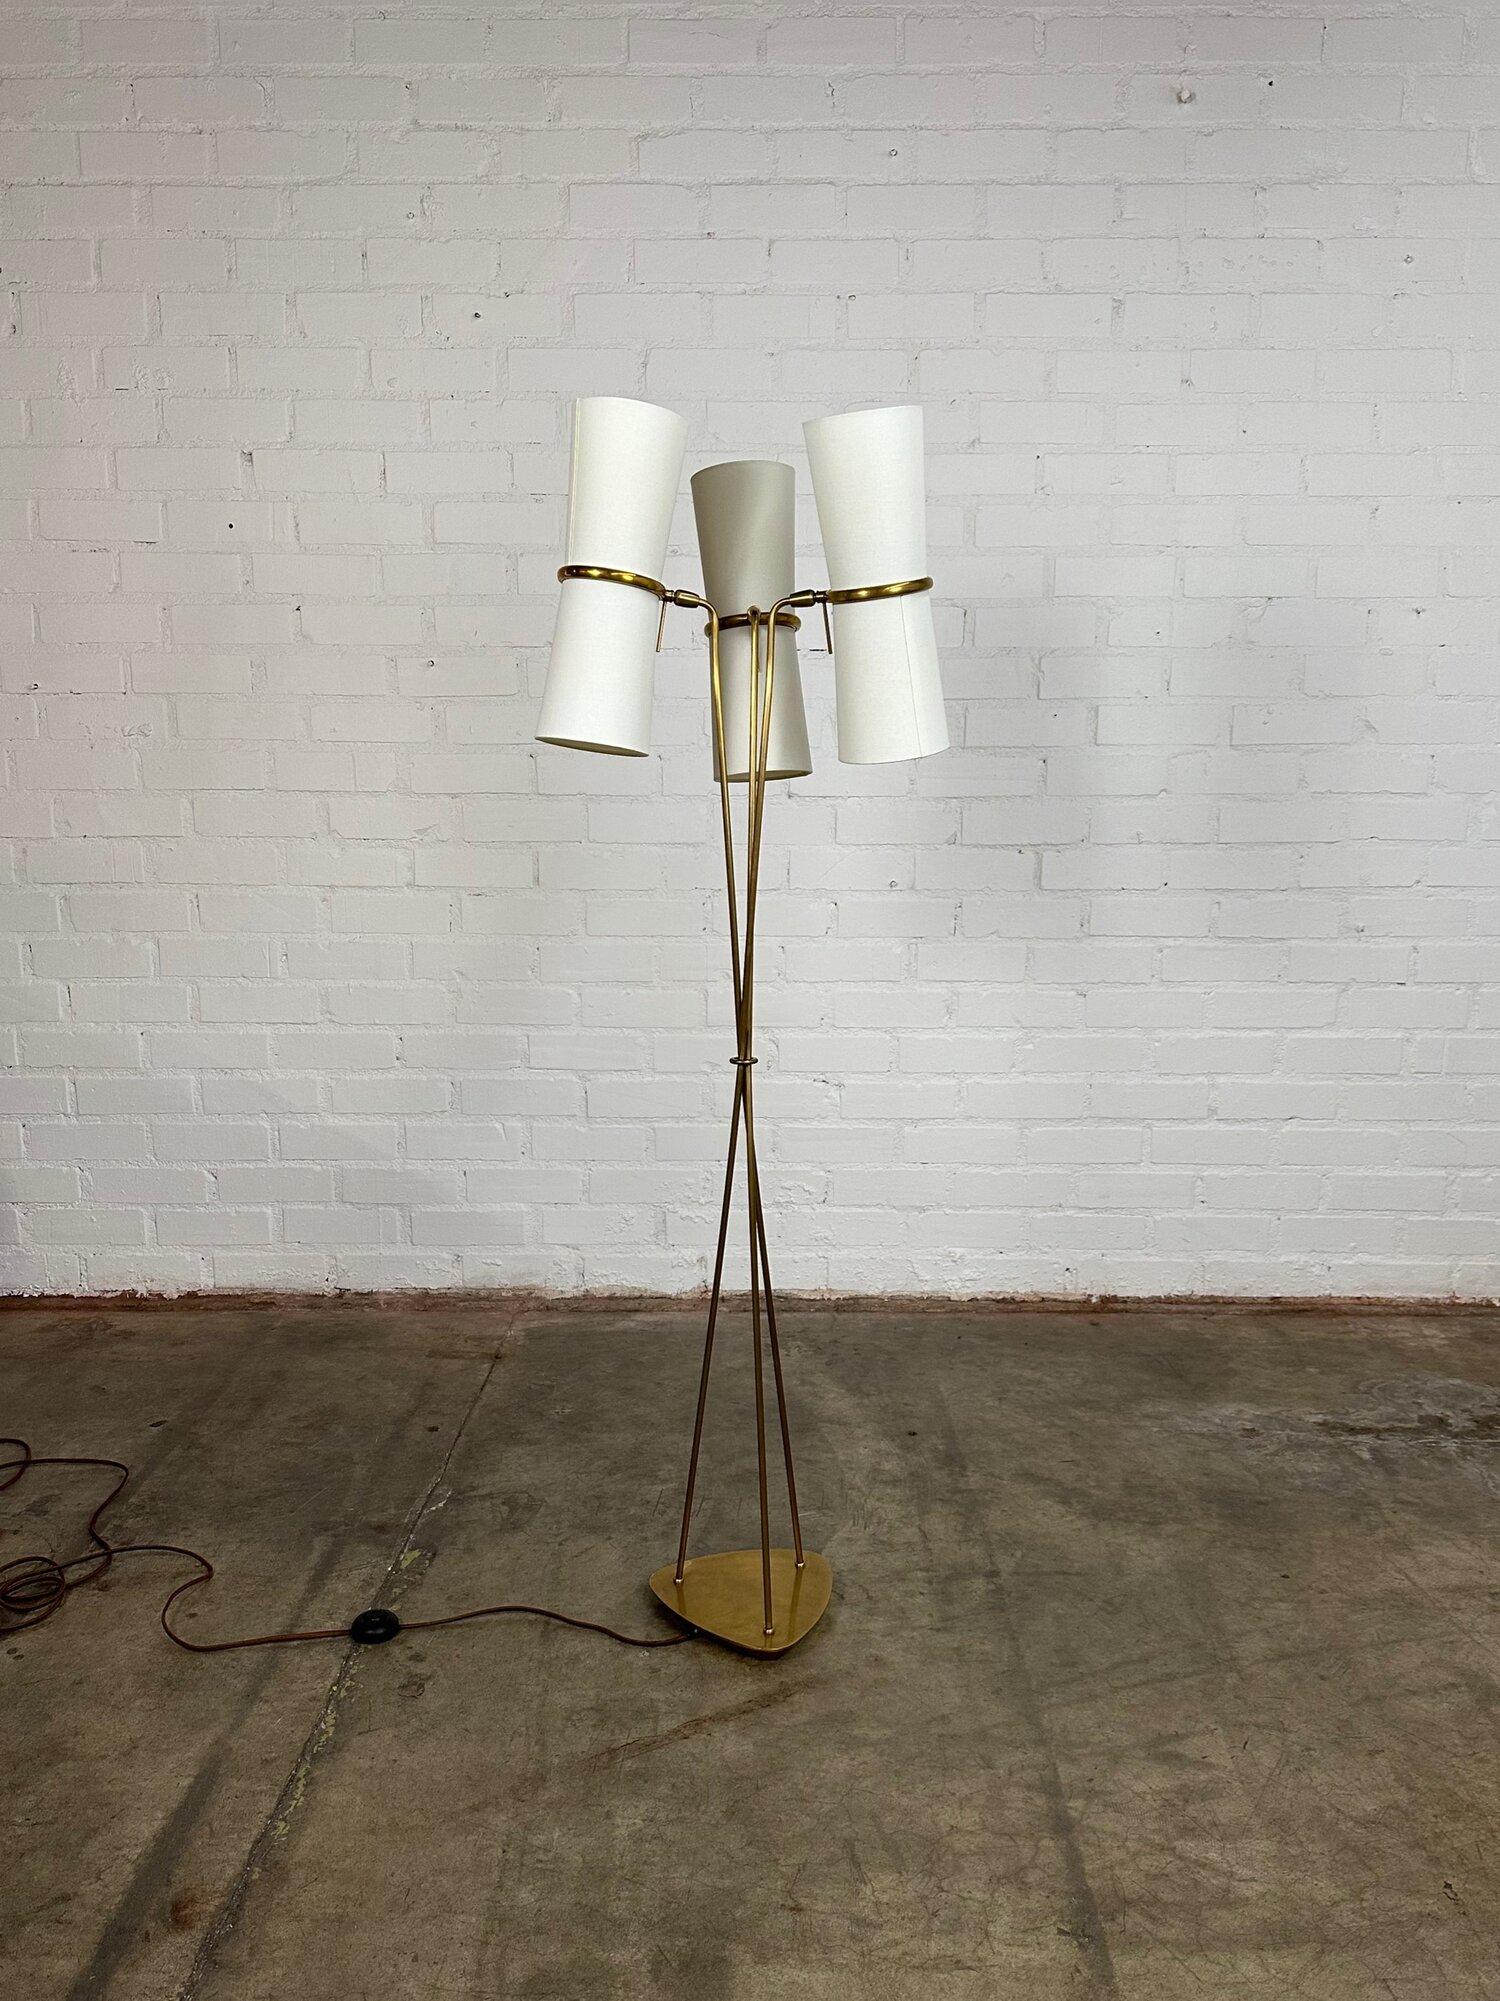 W10 D10 H63 Shade W21

Stunning brass floor lamp with white linen shades, the base is minimal in a triangular shape. The shades are in great condition and the lamp is fully functional with a warm yellow tone. All three lights turn on at once.